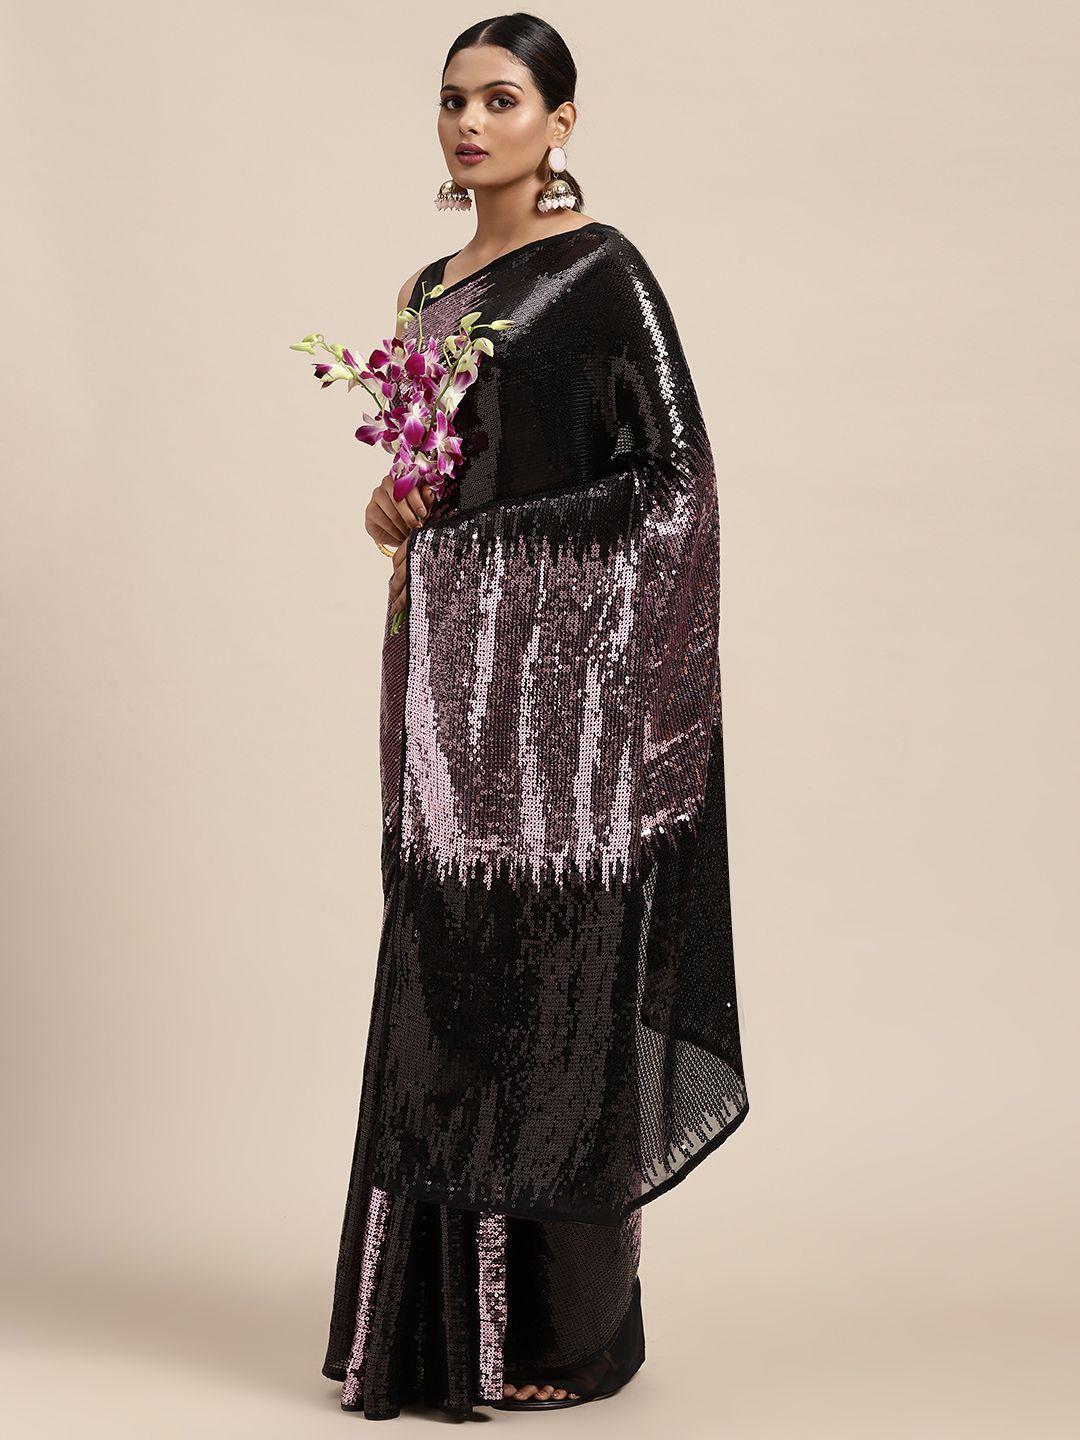 here&now purple & black sequinned embellished pure georgette saree